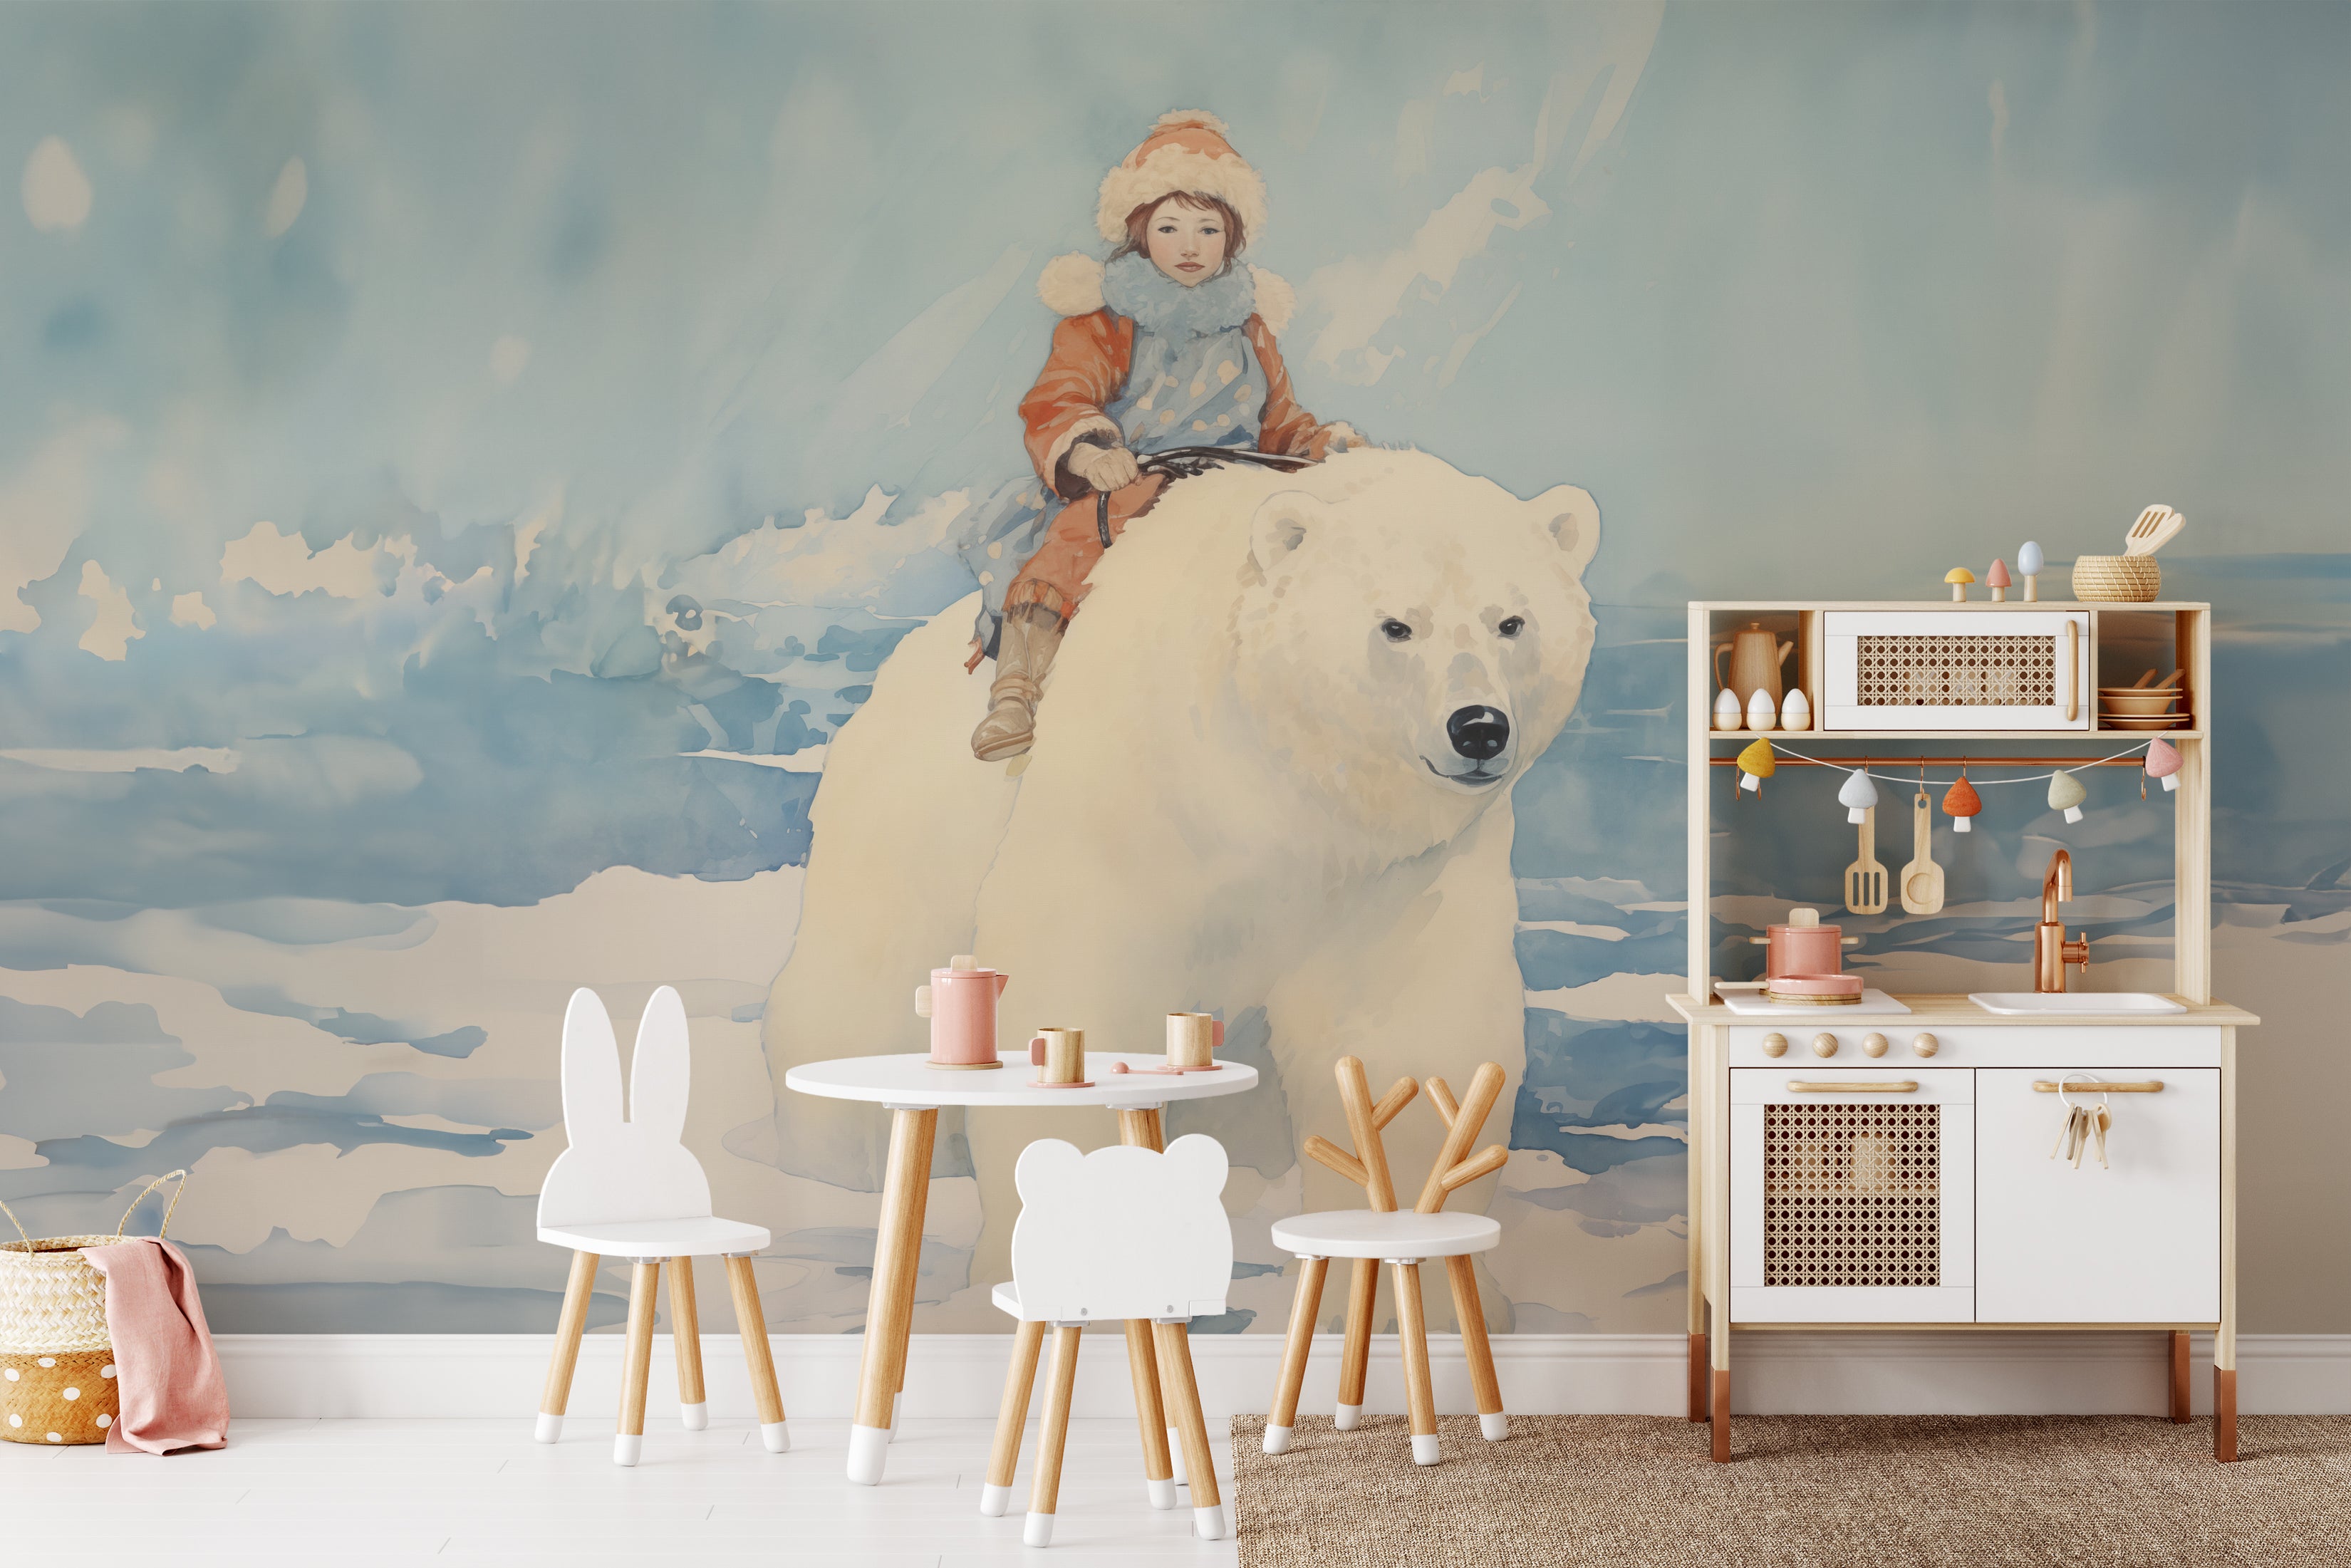 Dreamy child's playroom with wall mural of a young explorer on a polar bear from 'The Golden Compass Mural.